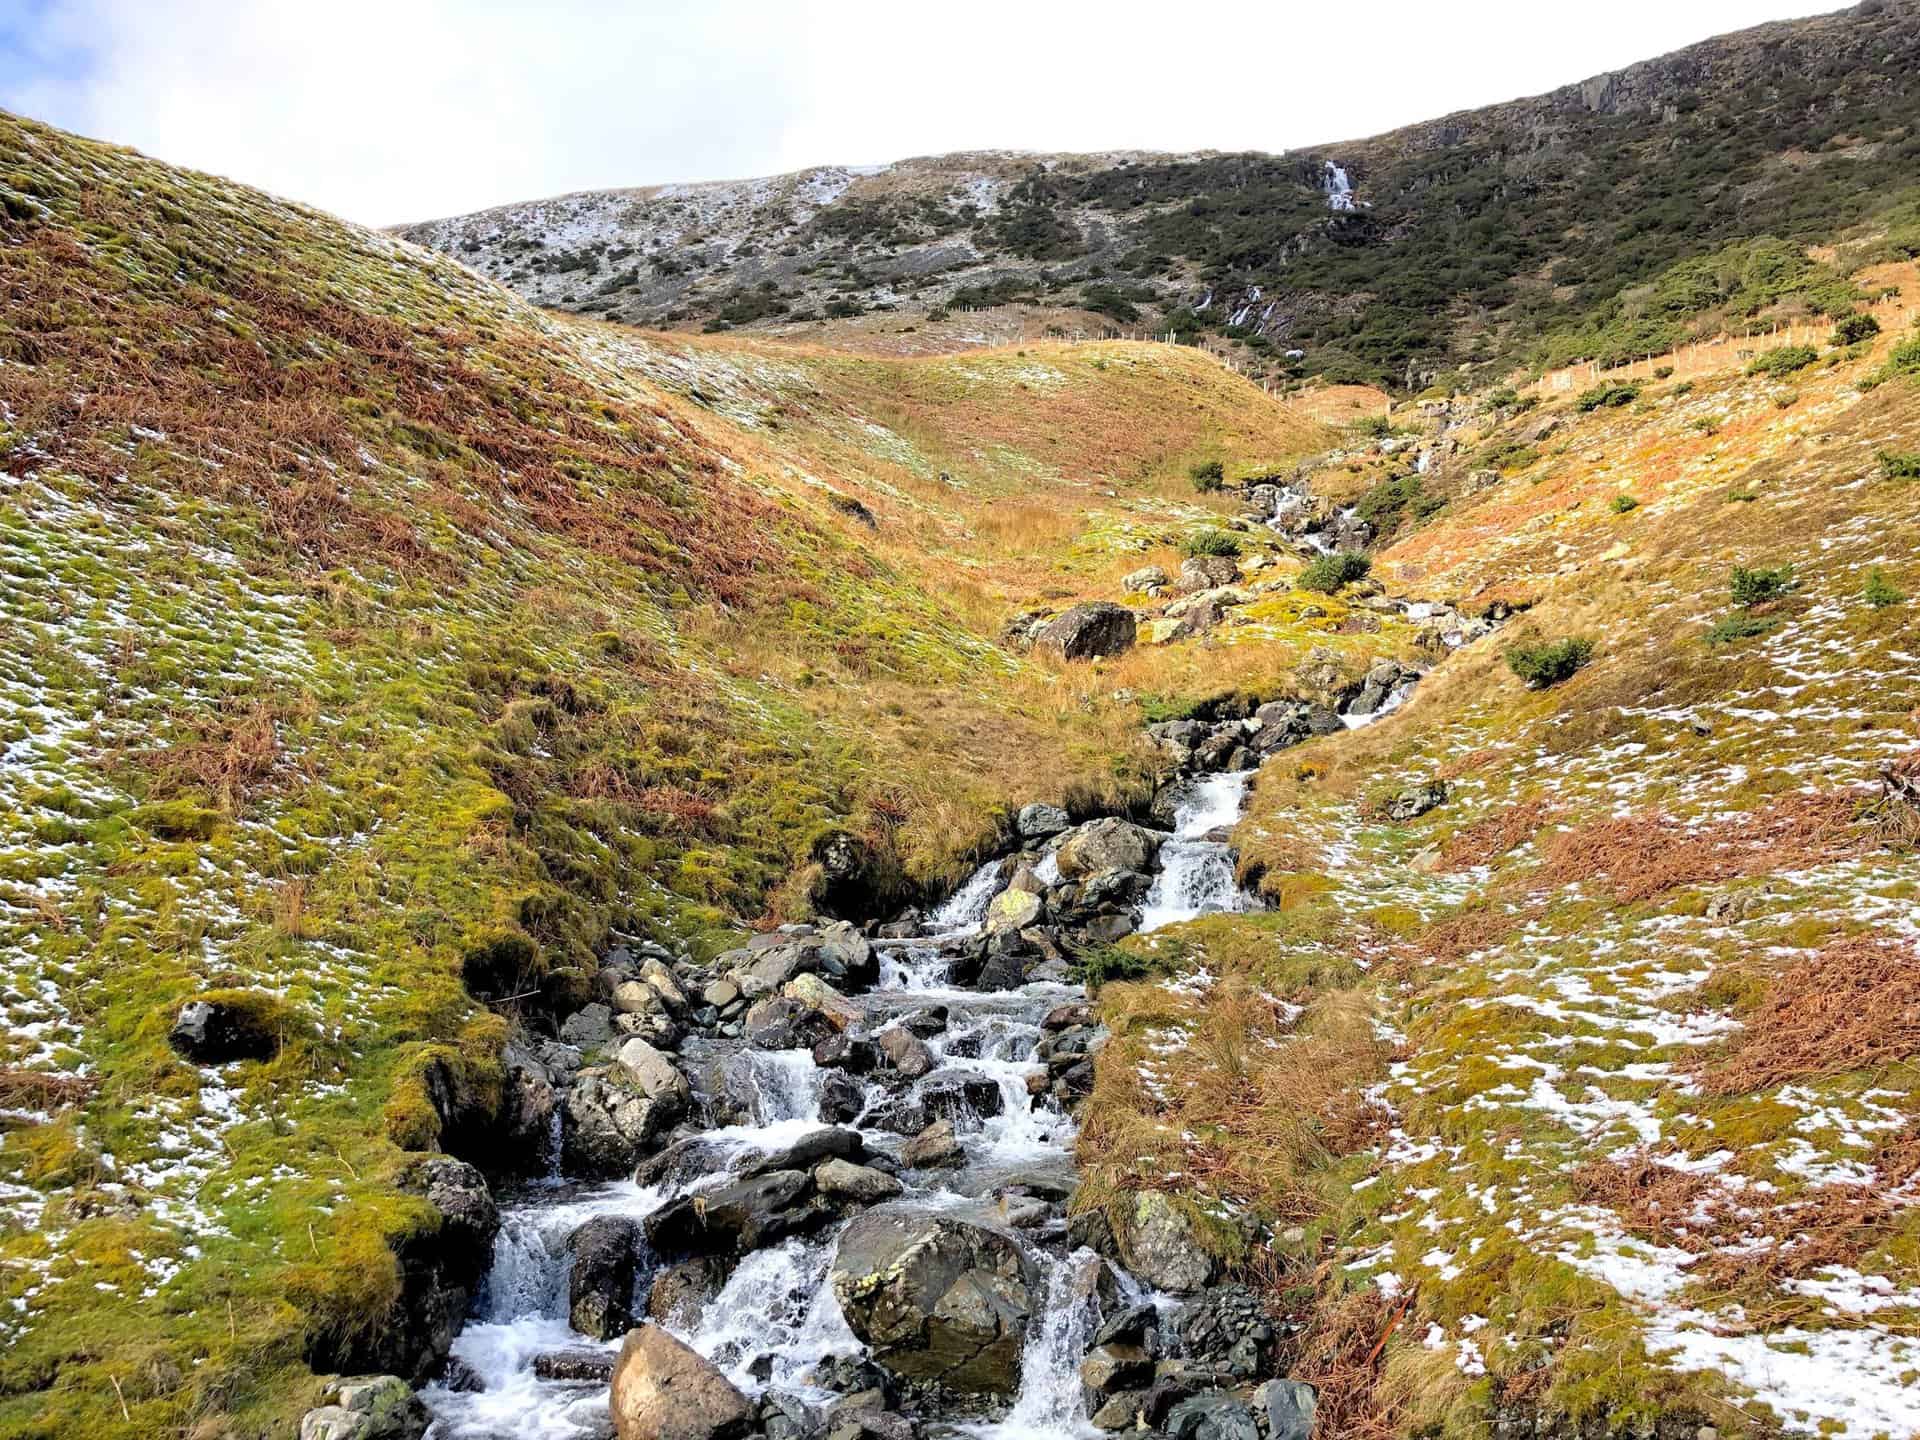 The serene Roten Beck waterfall, a highlight on the Glenridding Common stretch.